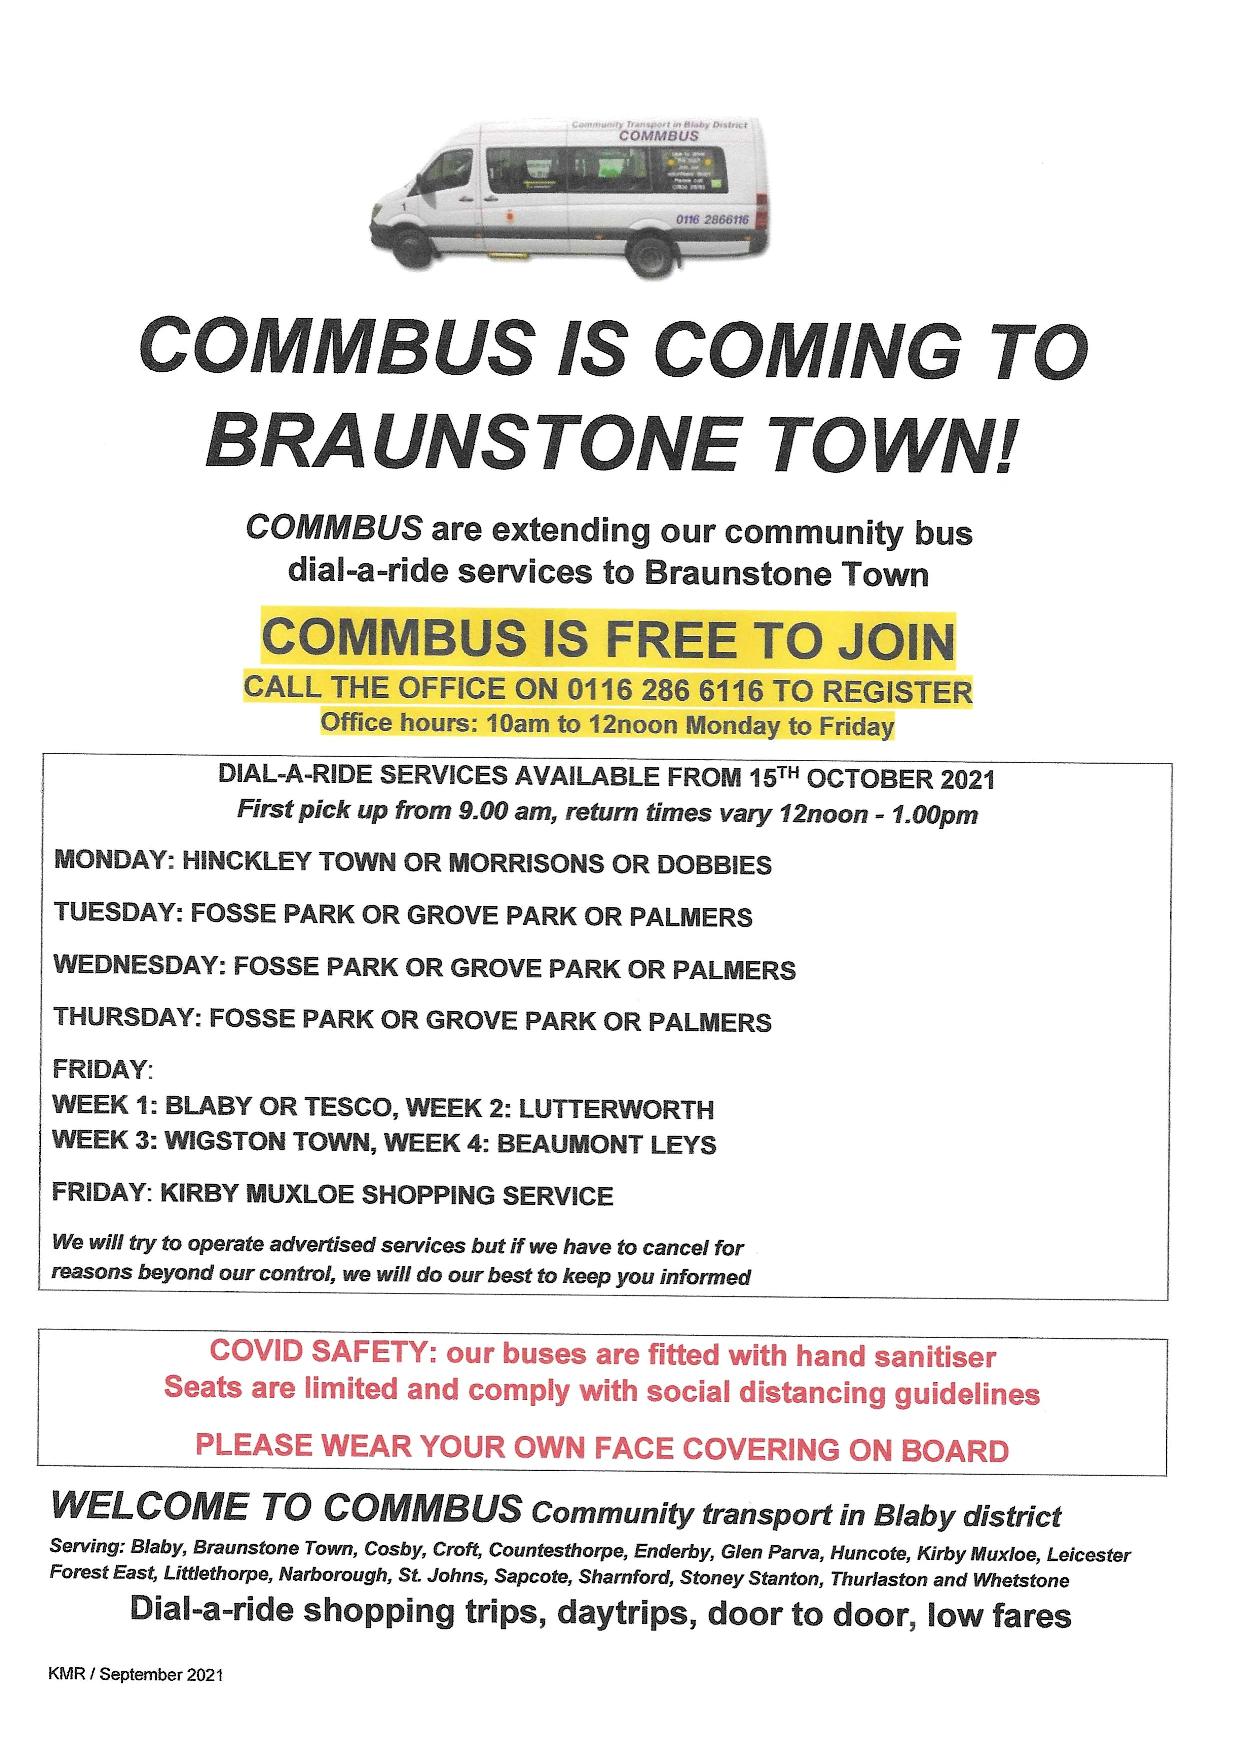 2021 10 Commbus is coming to Braunstone Town ad and poster page 001